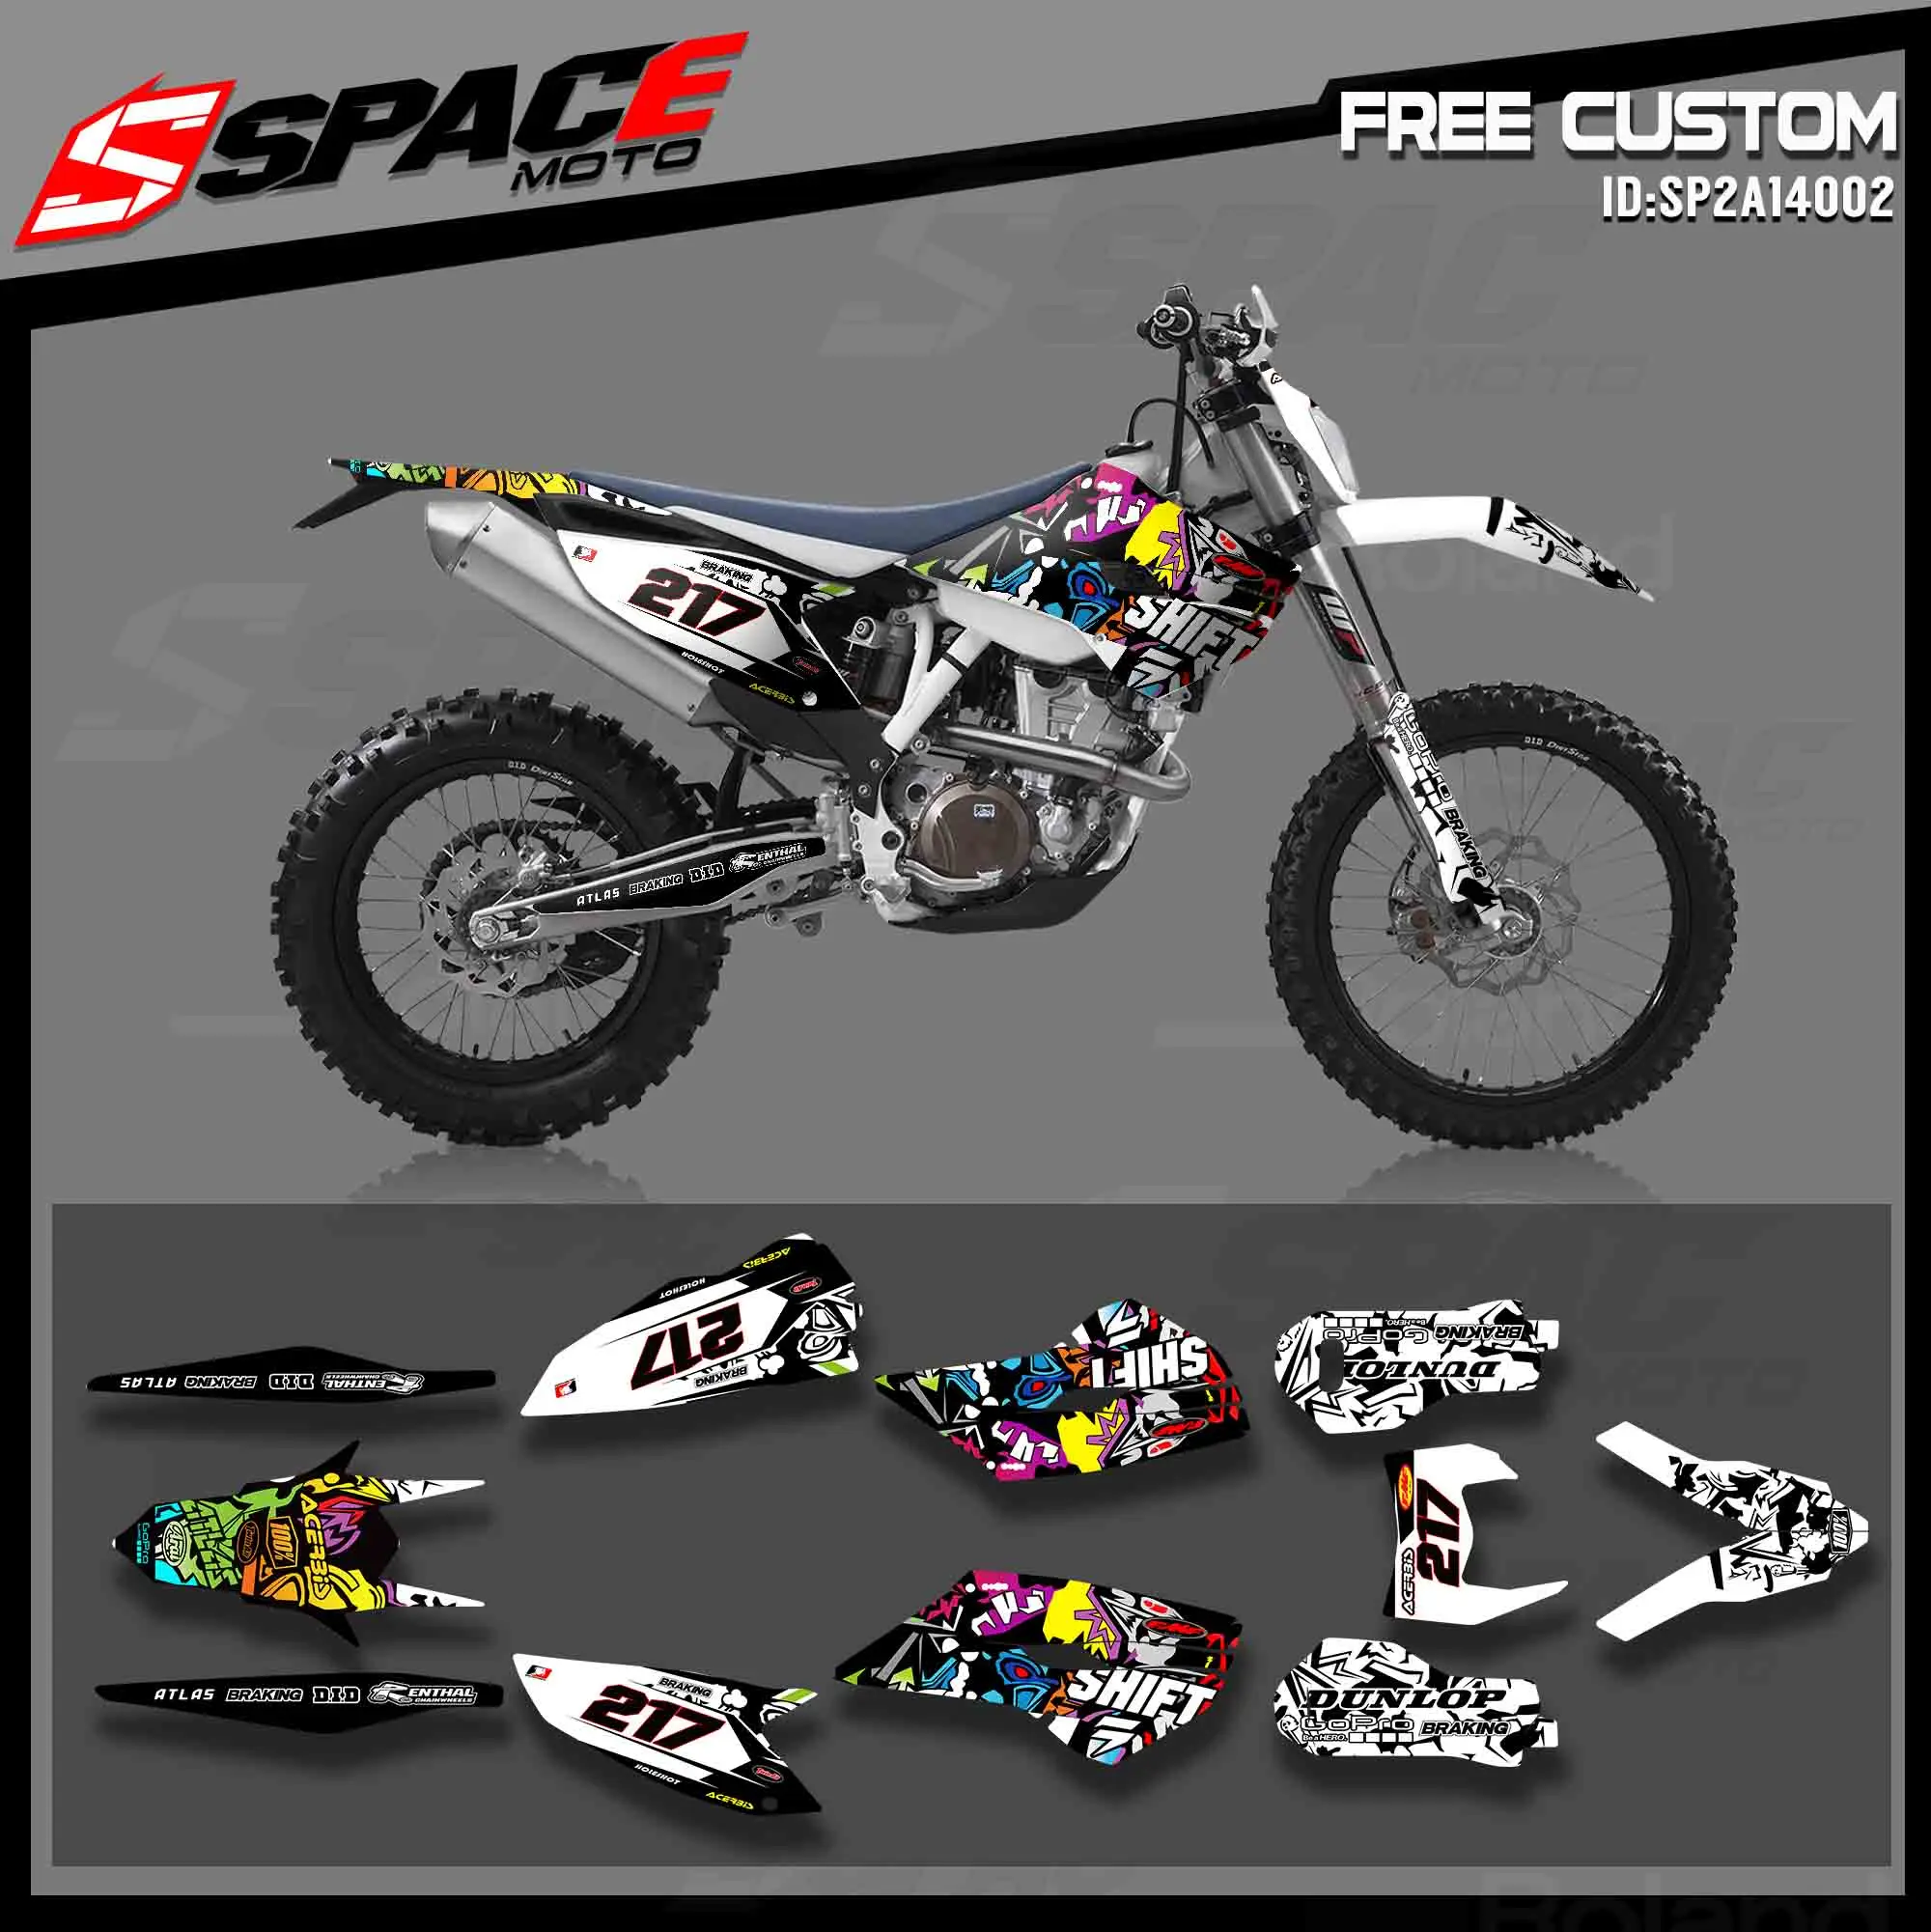 

SPACEMOTO Motorcycle Team Graphic Decal & Sticker Kit For Husqvarna TC FC TX FX FS2014-2015TE FE 2014-2016 Motocross Racing